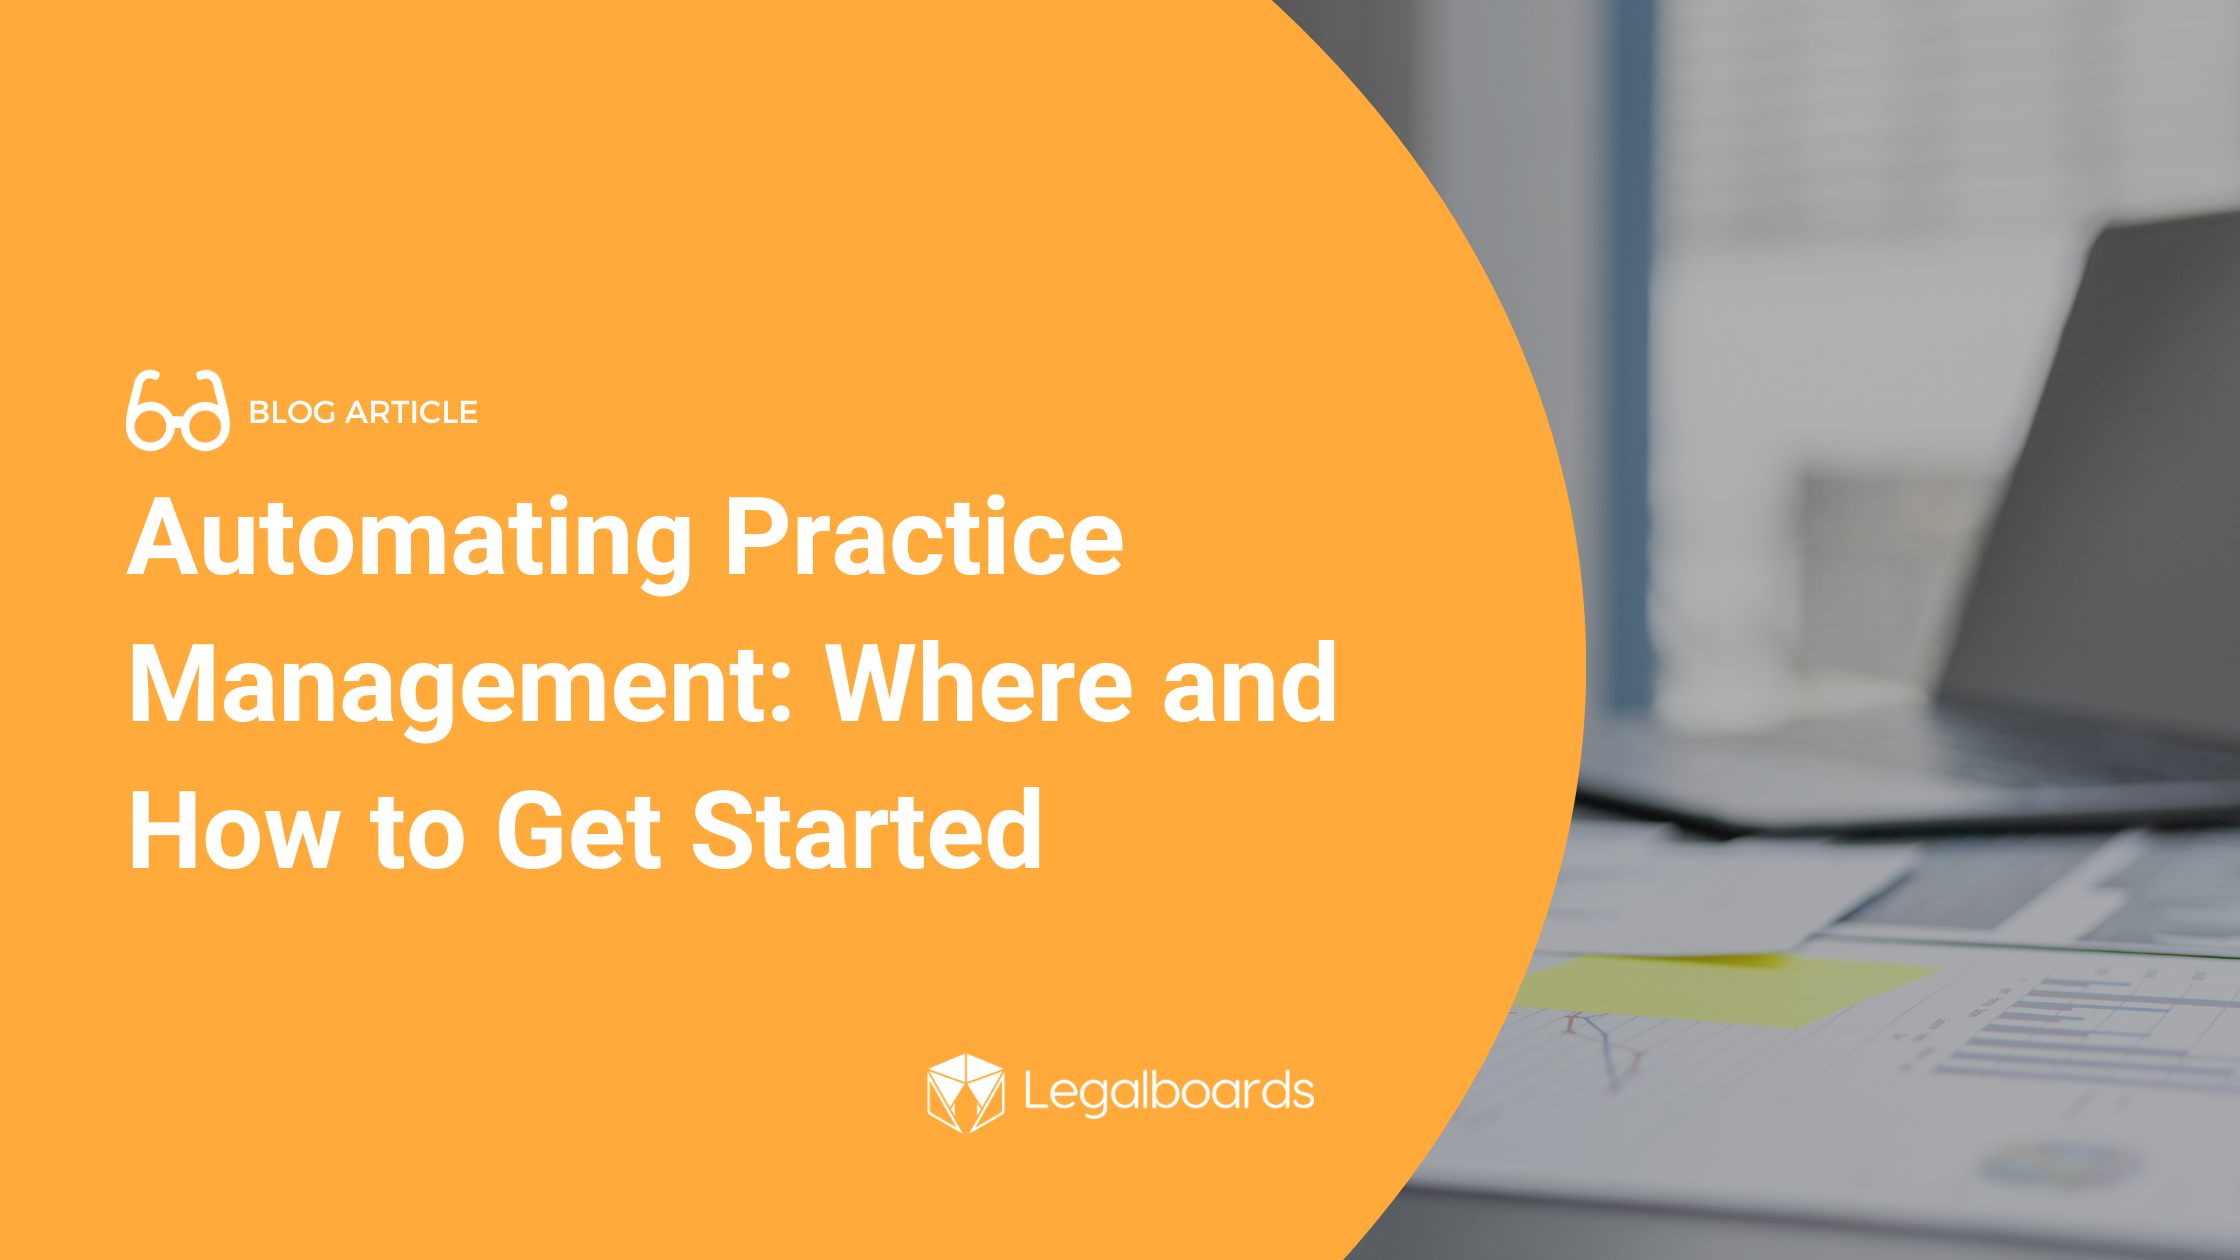 Automating Practice Management: Where and How to Get Started